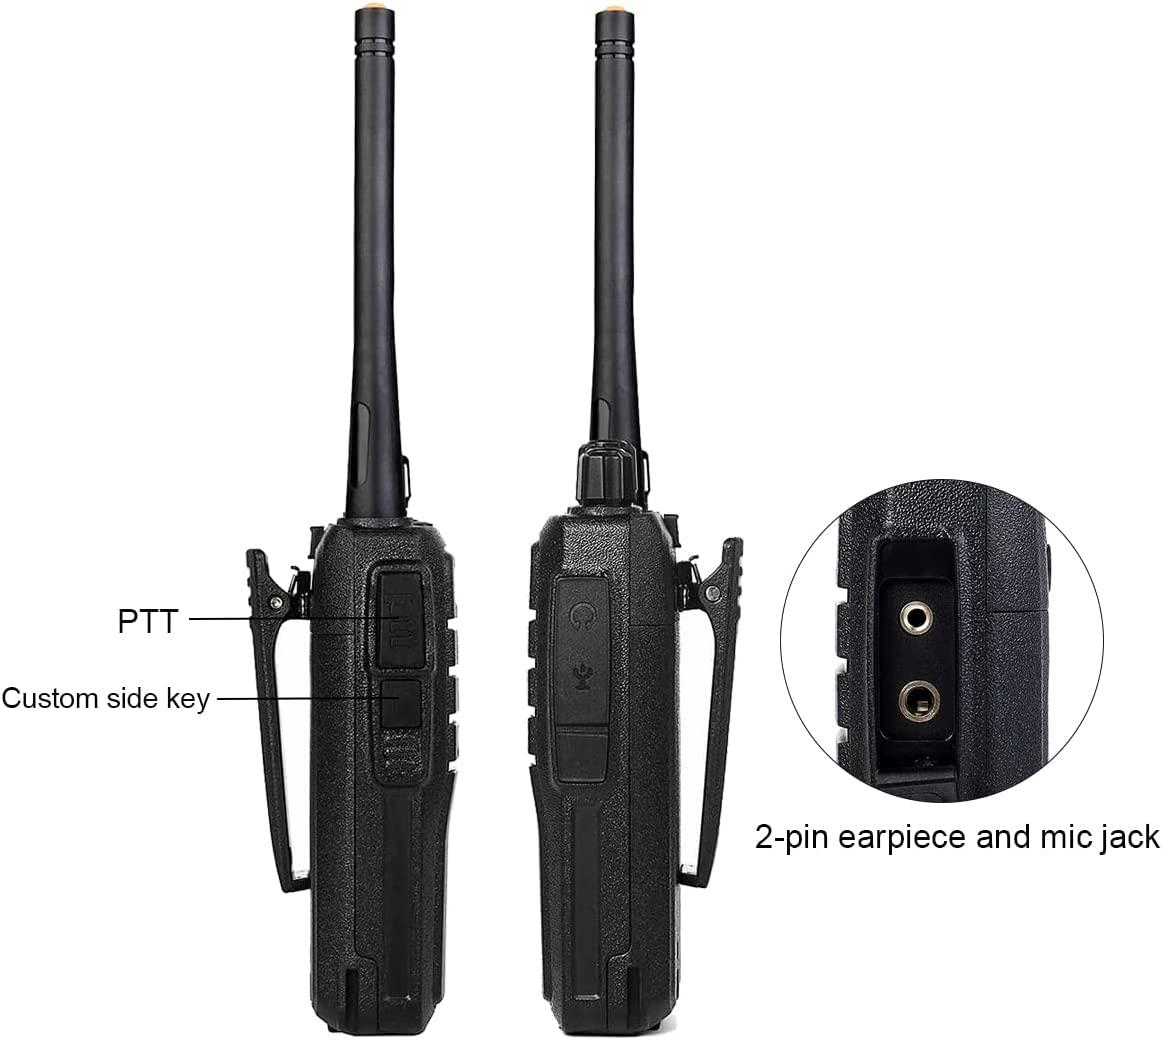  Retevis RT21 Walkie Talkies for Adults(4 Pack),and NR10 AI  Noise Cancelling Two Way Radios with Shoulder Mic(4 Pack),Portable,FRS,  Durable, Heavy Duty, for Business : Electronics